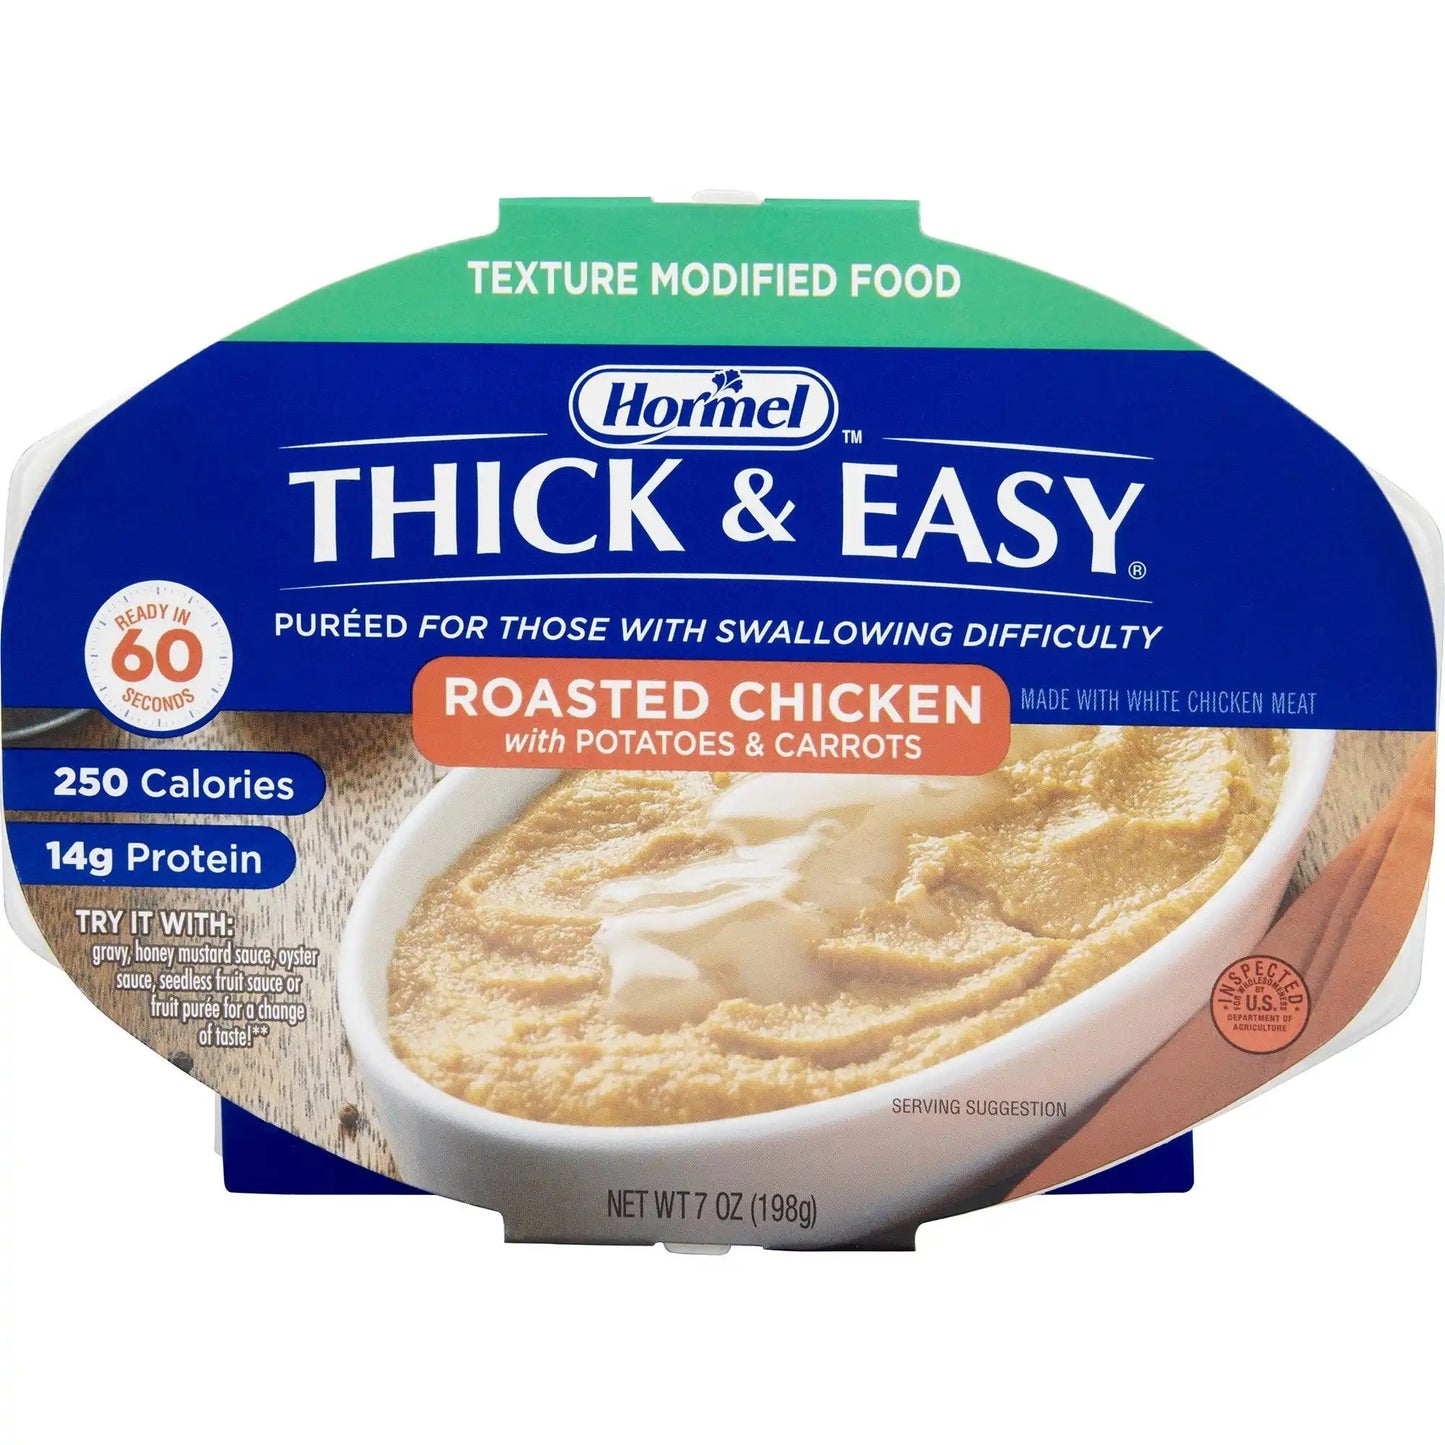 Thick & Easy Ready to Use Purées Roasted Chicken with Potatoes and Carrots Purée, 7 oz. Tray